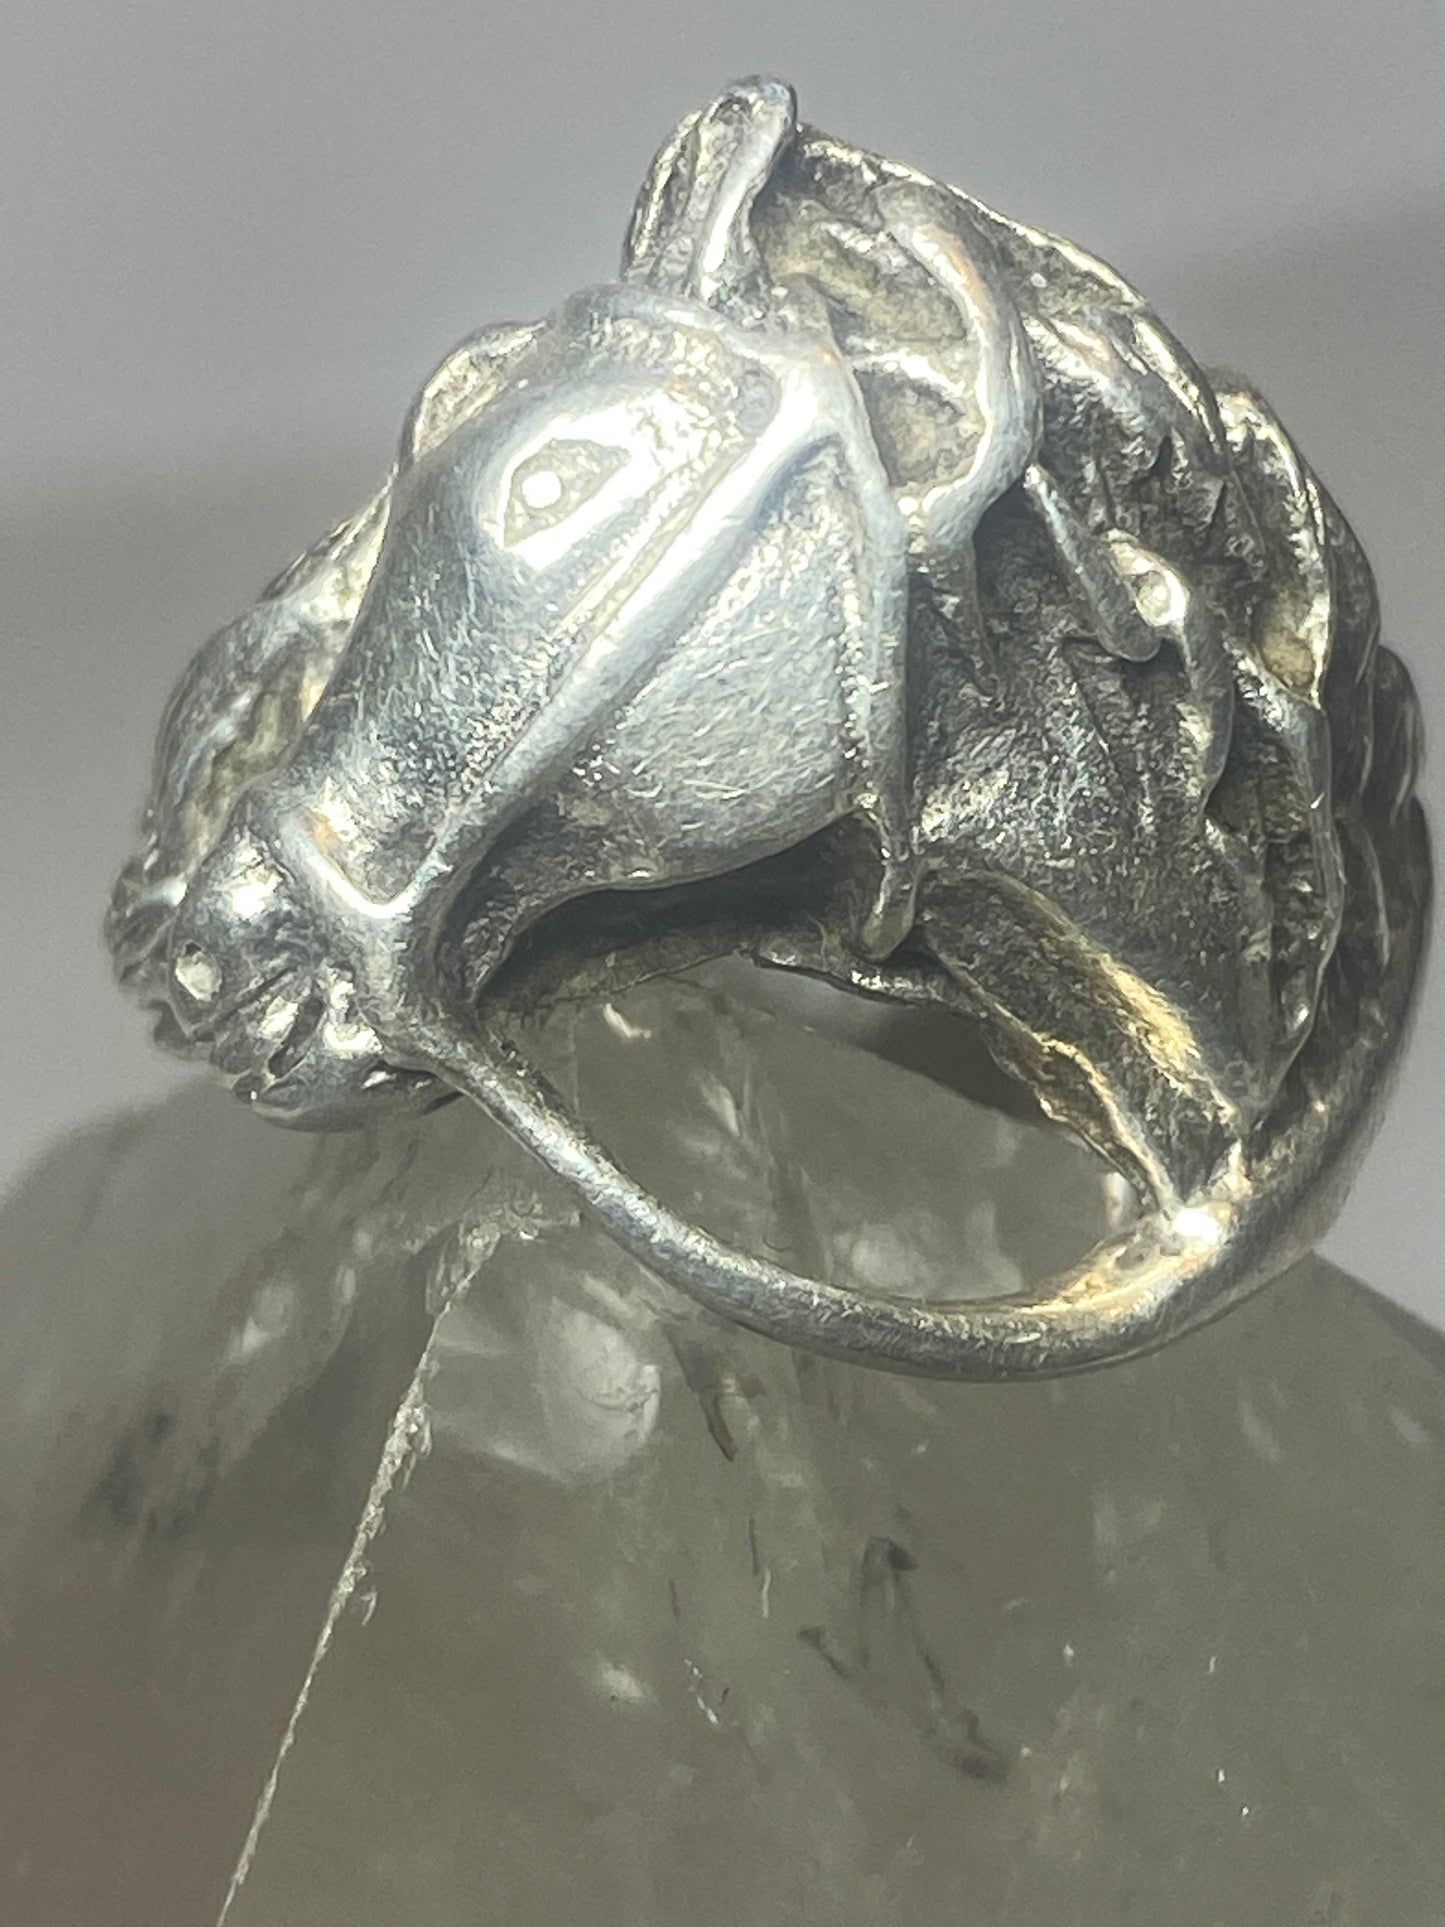 Horse ring southwest band cowgirl western sterling silver women girls